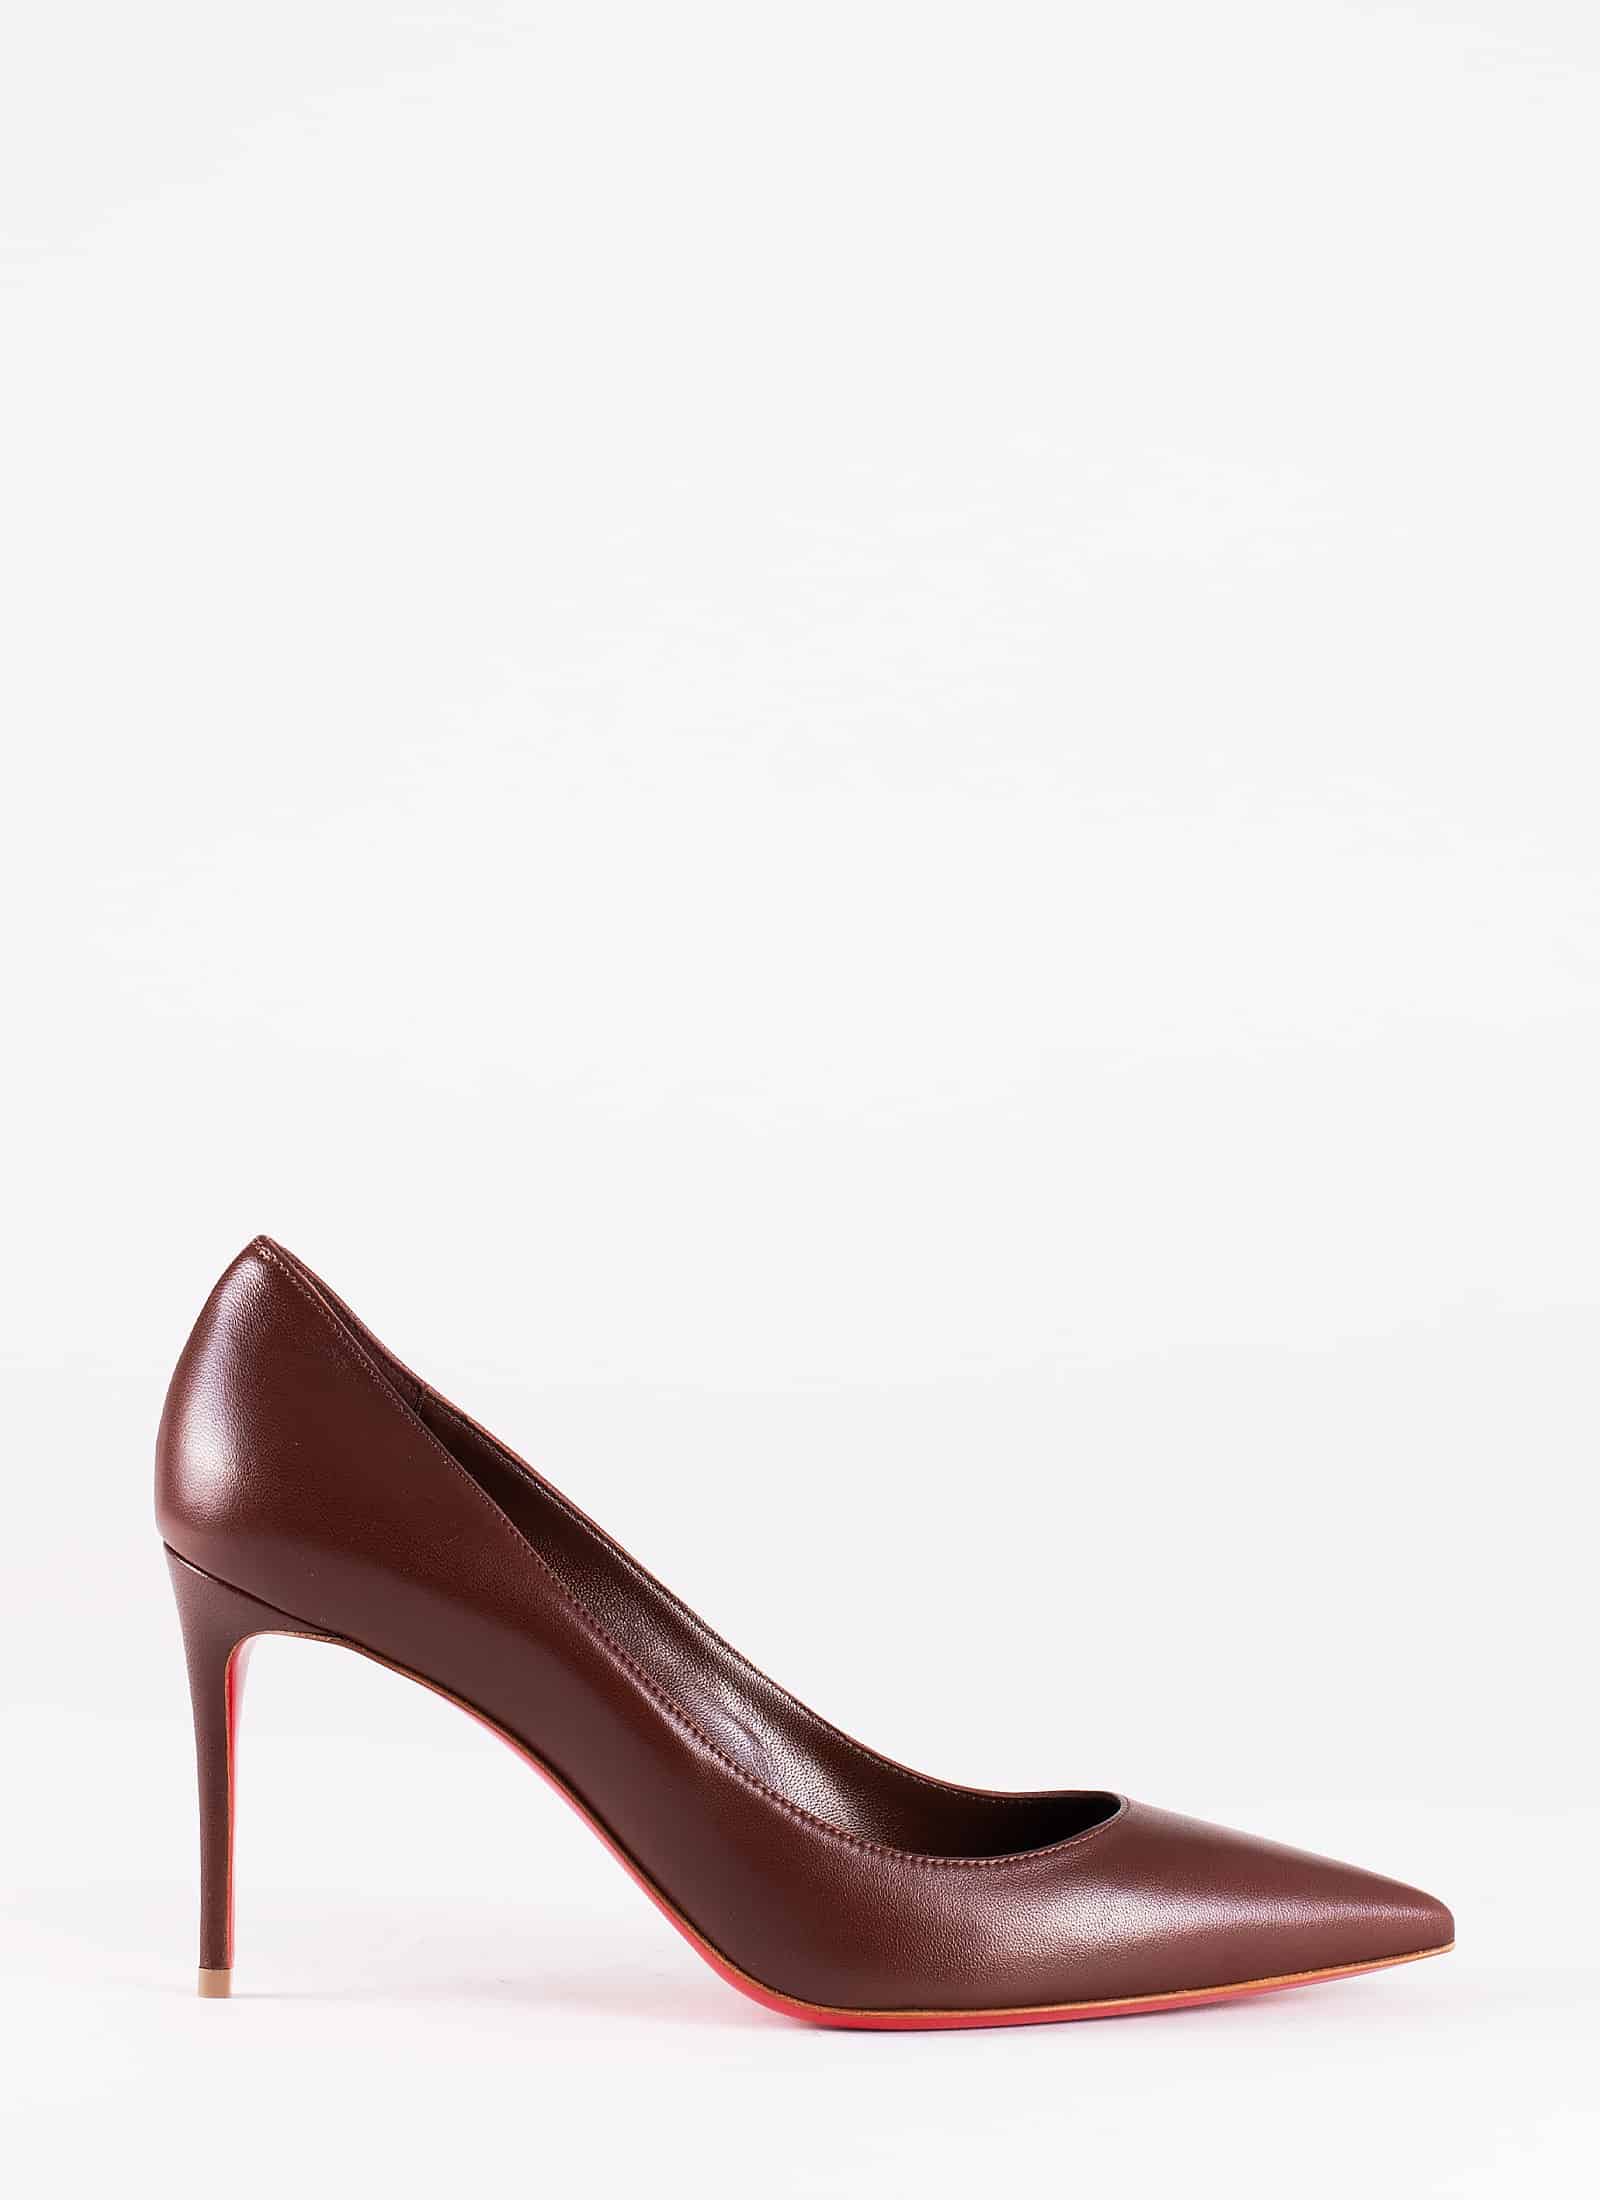 LEATHER SHOES "KATE" - CHRISTIAN LOUBOUTIN